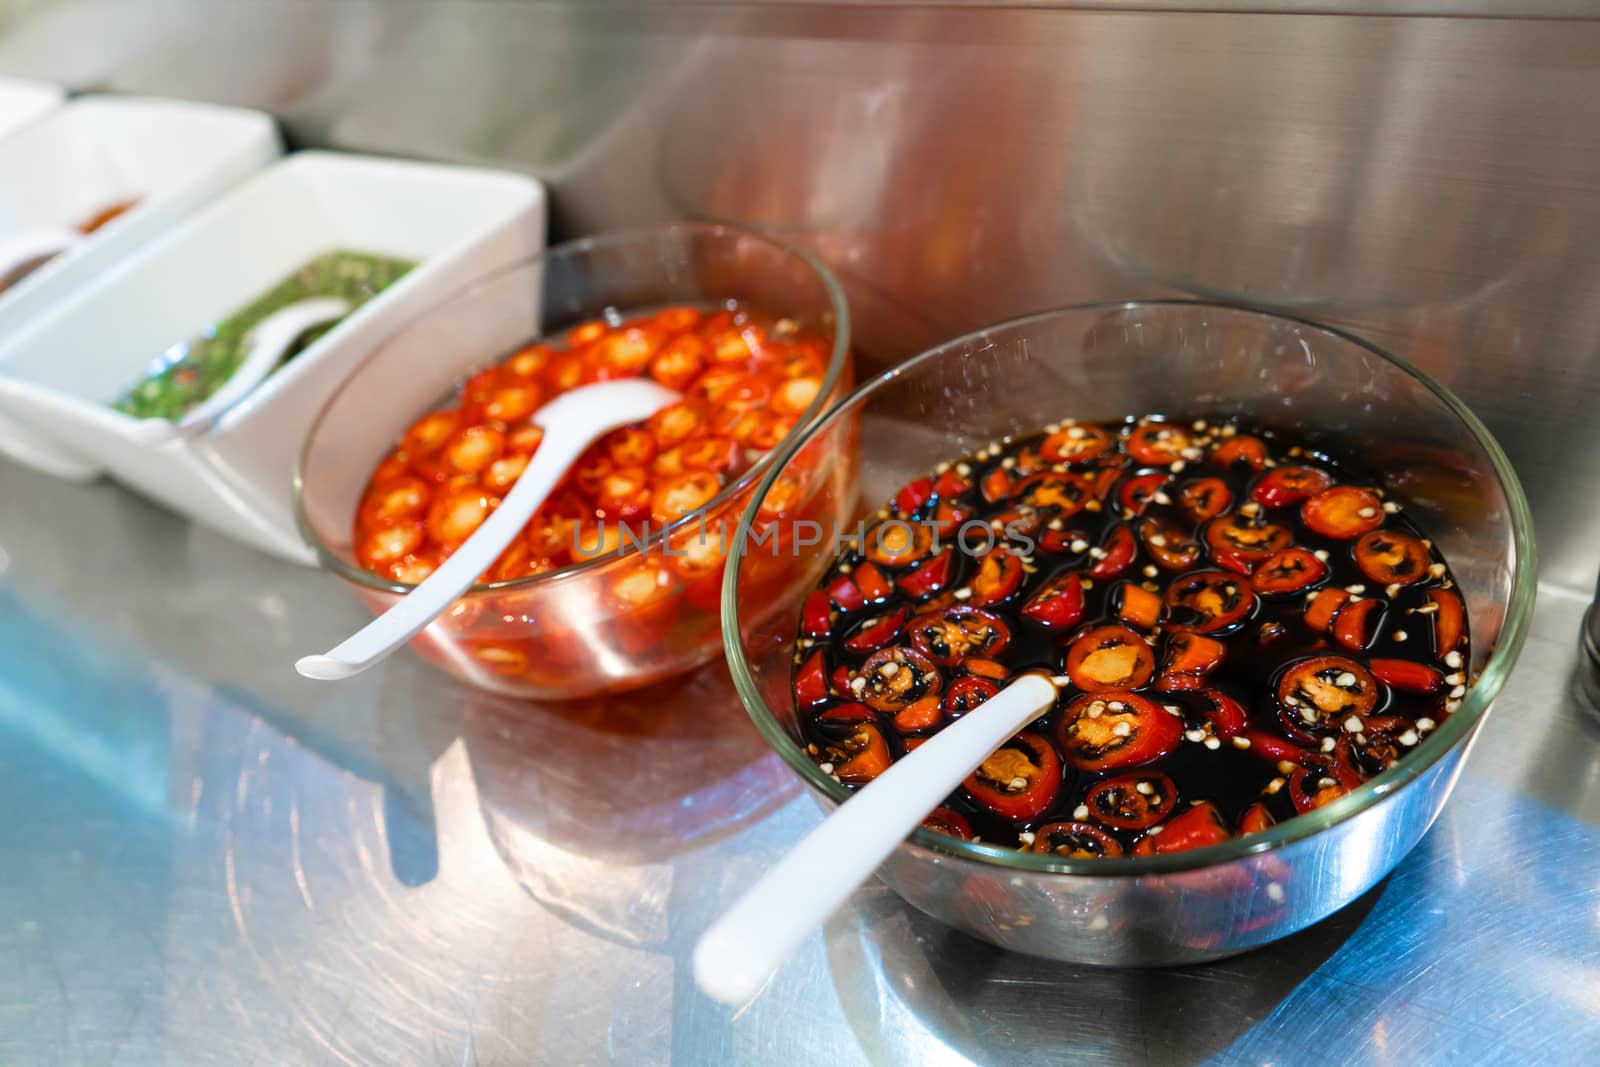 Street food market in Asia. Bowls with hot sauces of various types